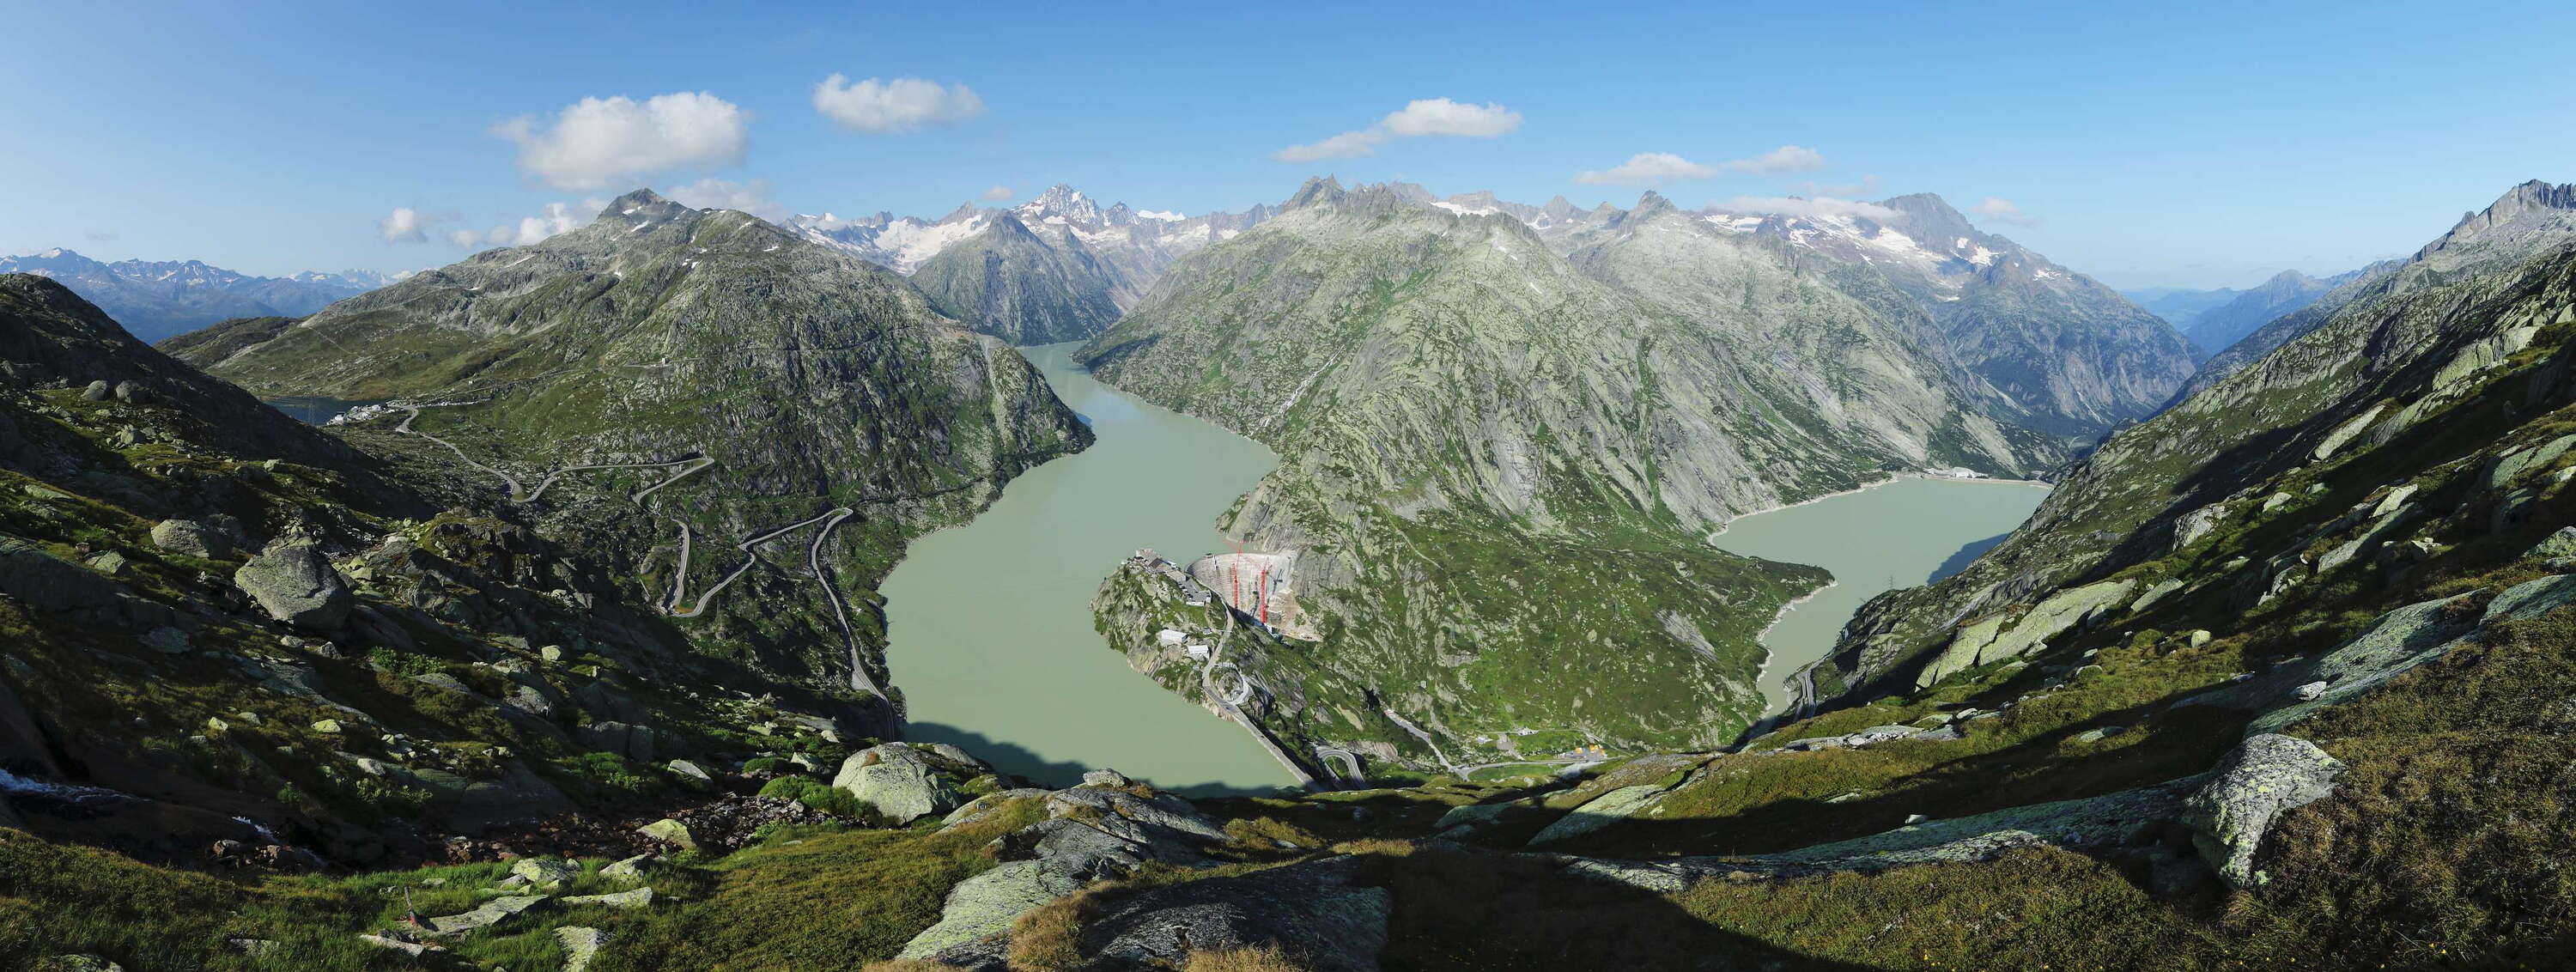 Grimselpass | Panoramic view with reservoirs